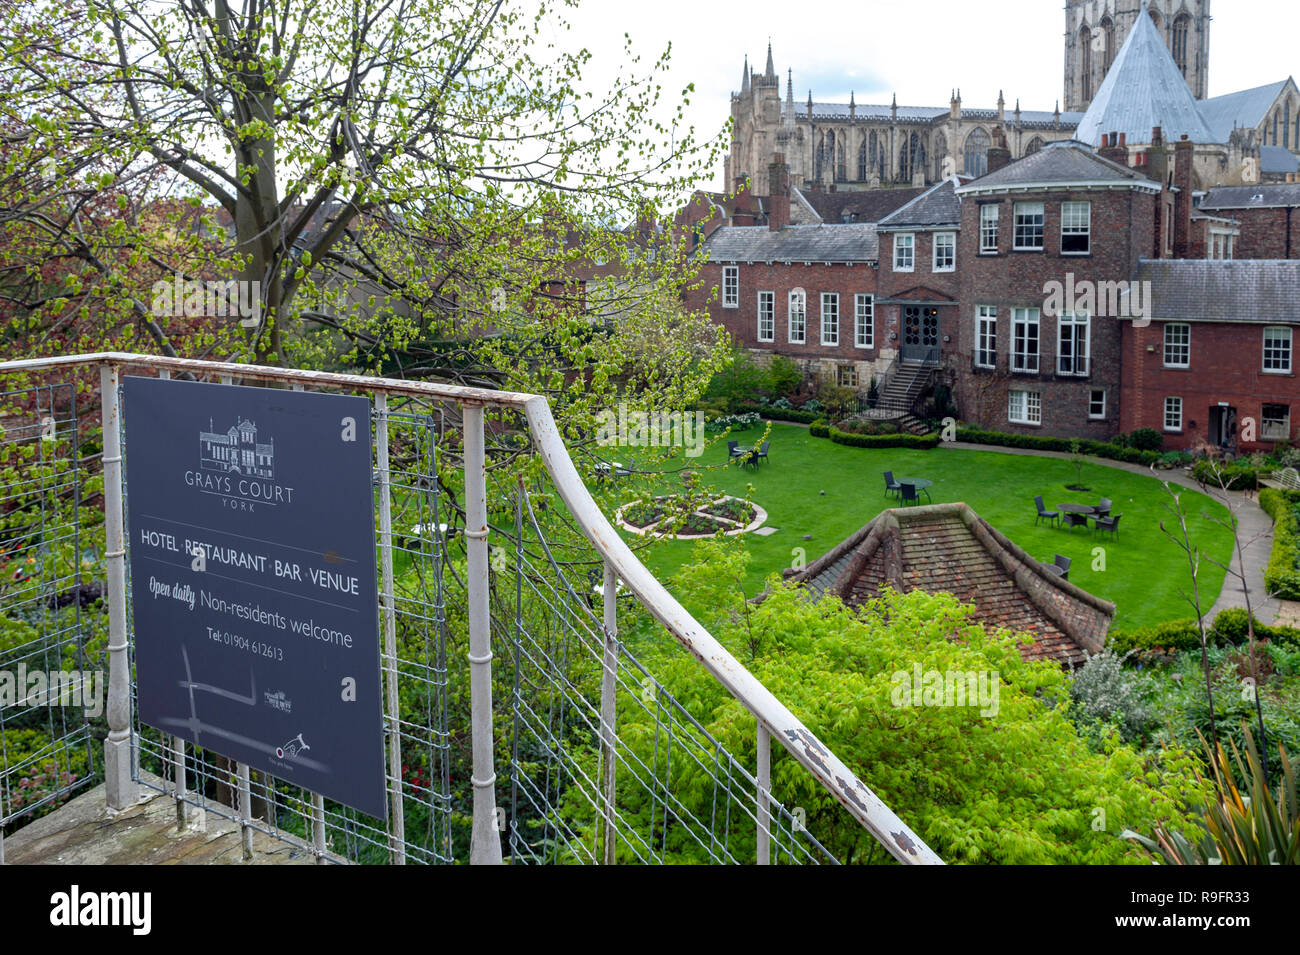 York, England - April 2018: Old building of Grays Court Hotel and Restaurant in old town seen from York City Walls in City of York, England, UK Stock Photo